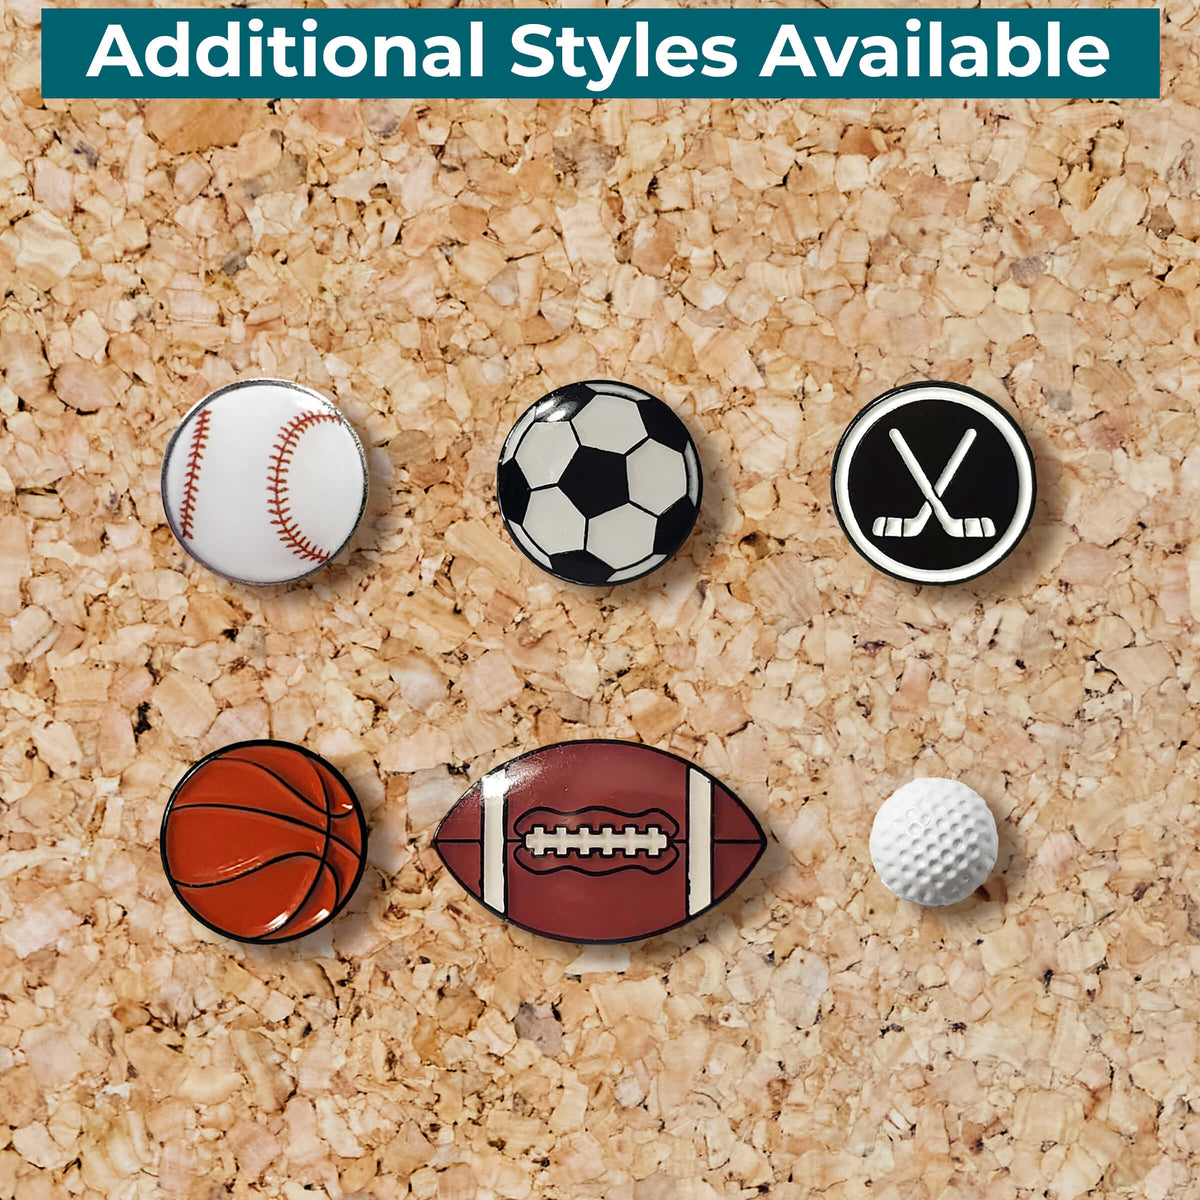 Multiple Styles of Sports Push Pins are Available at PushPinTravelMaps.com